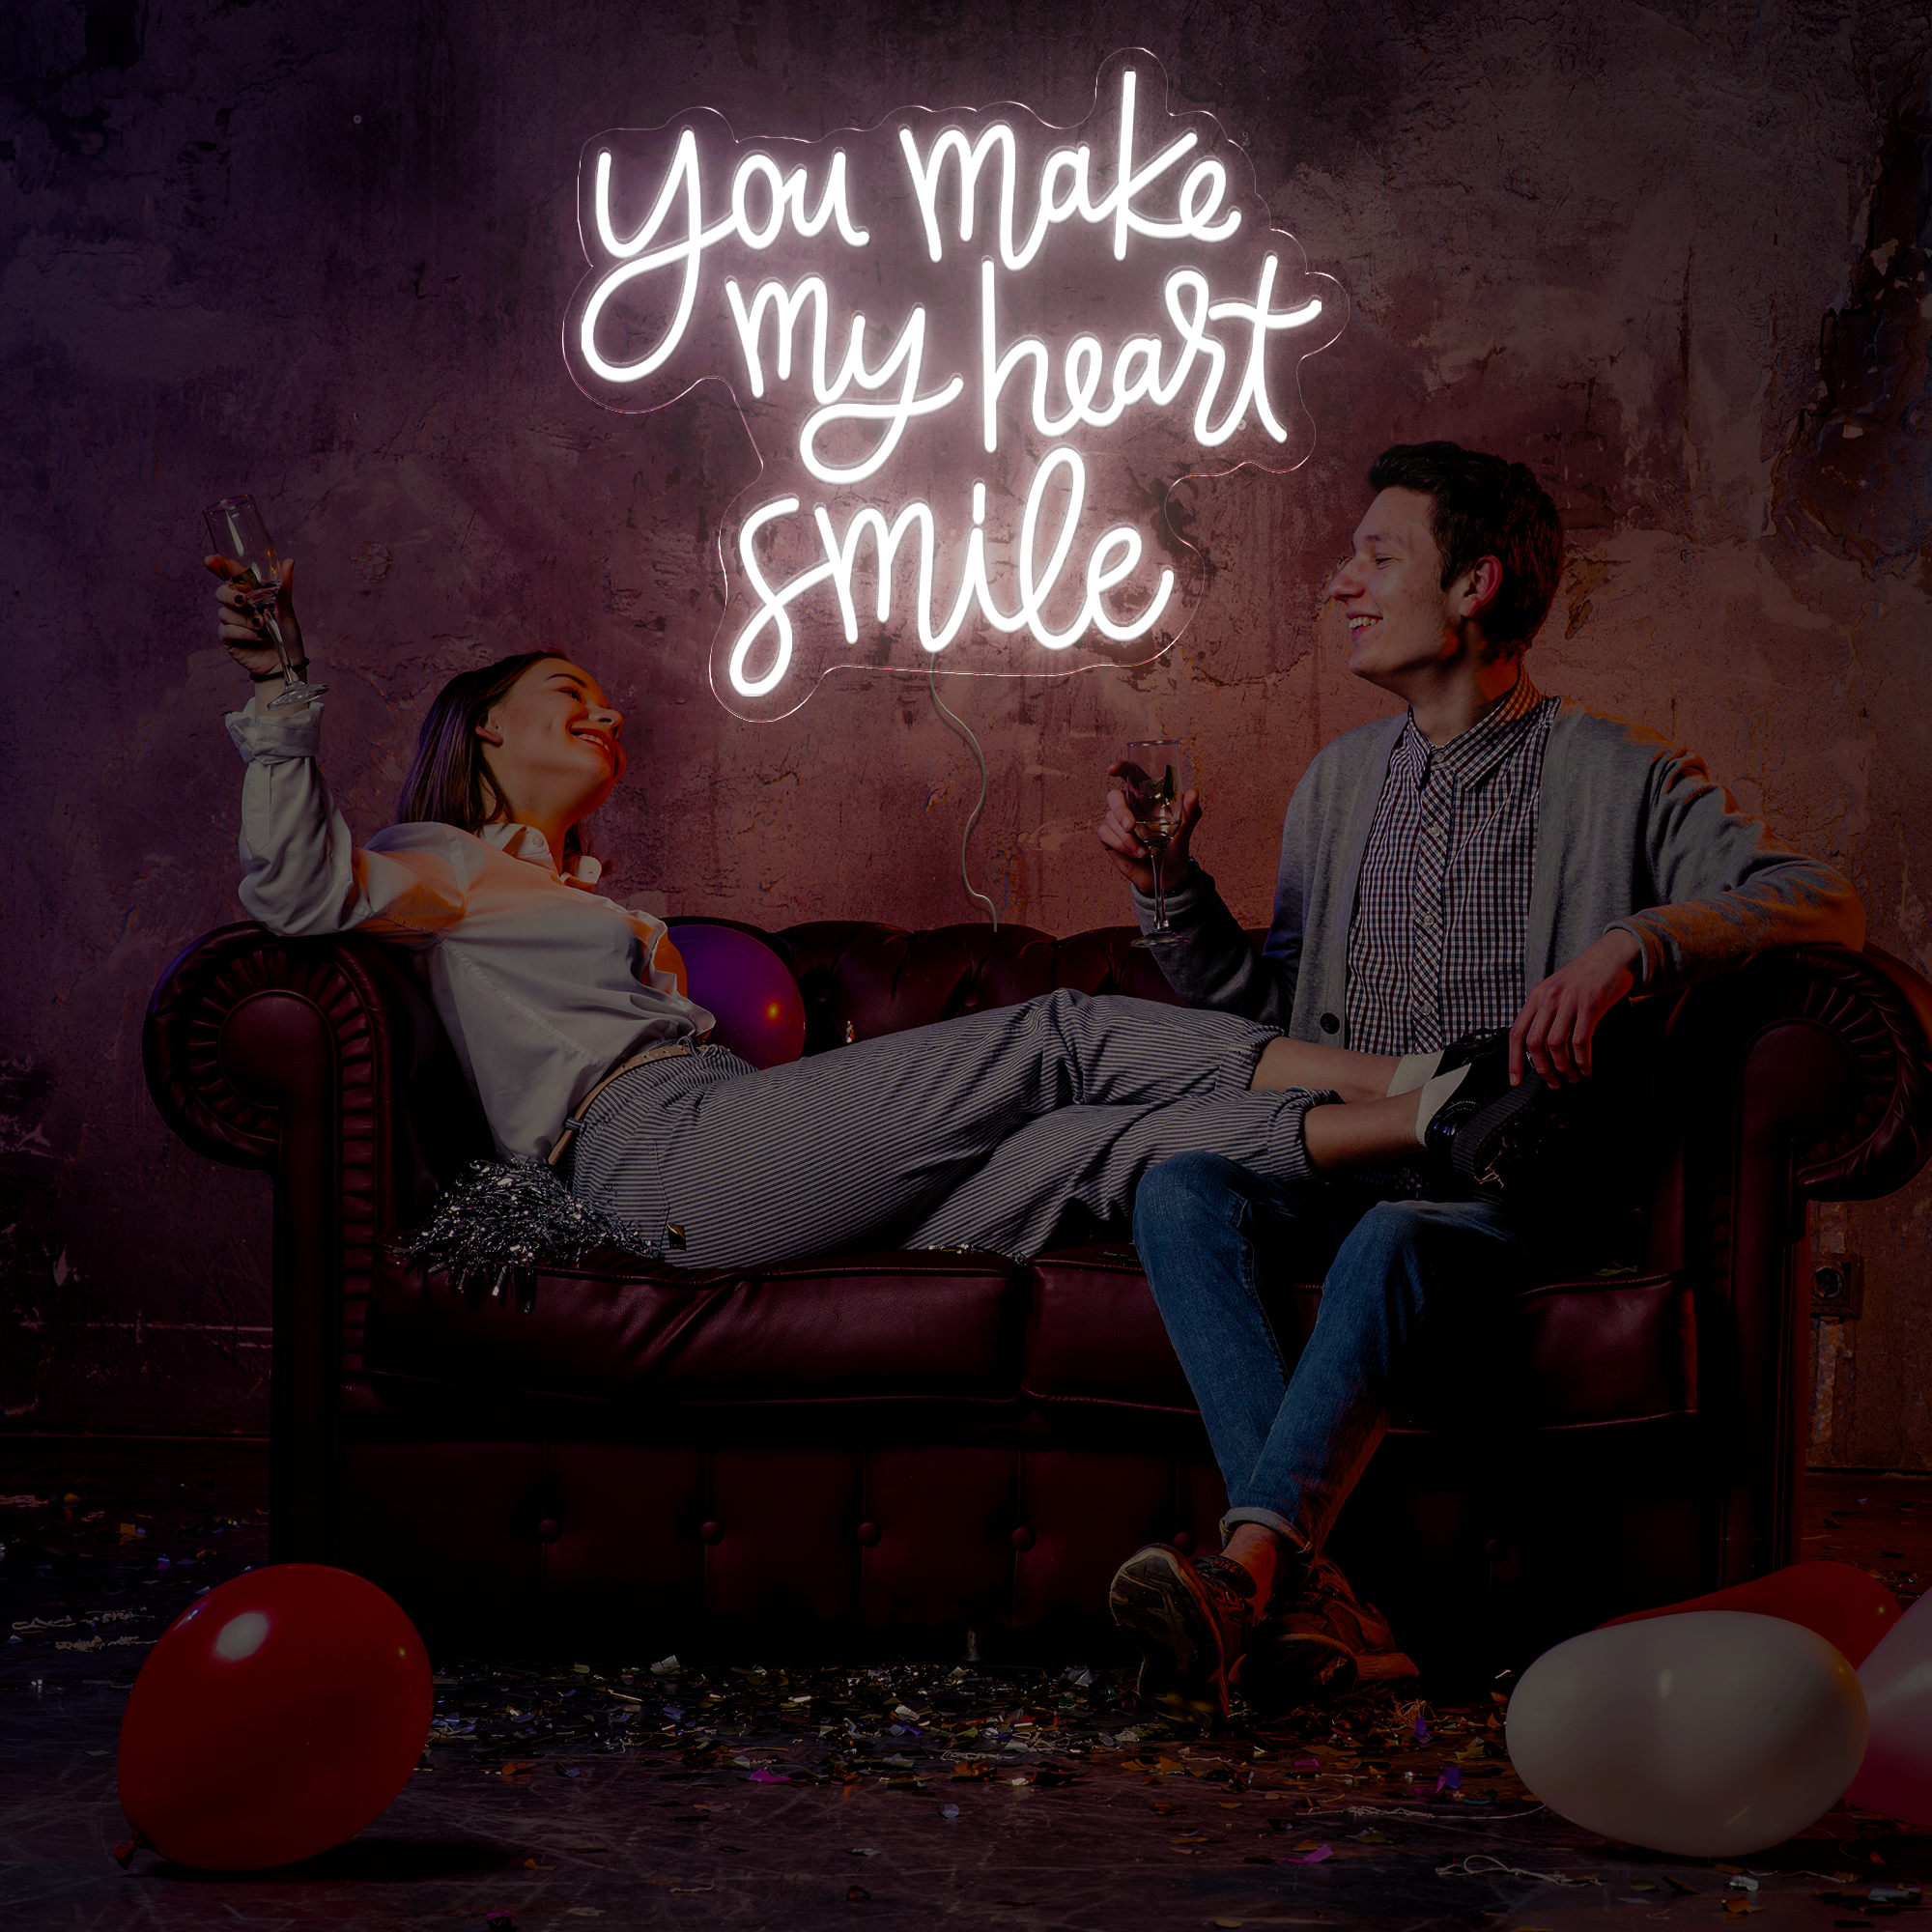 You Make My Heart Smile Neon Sign